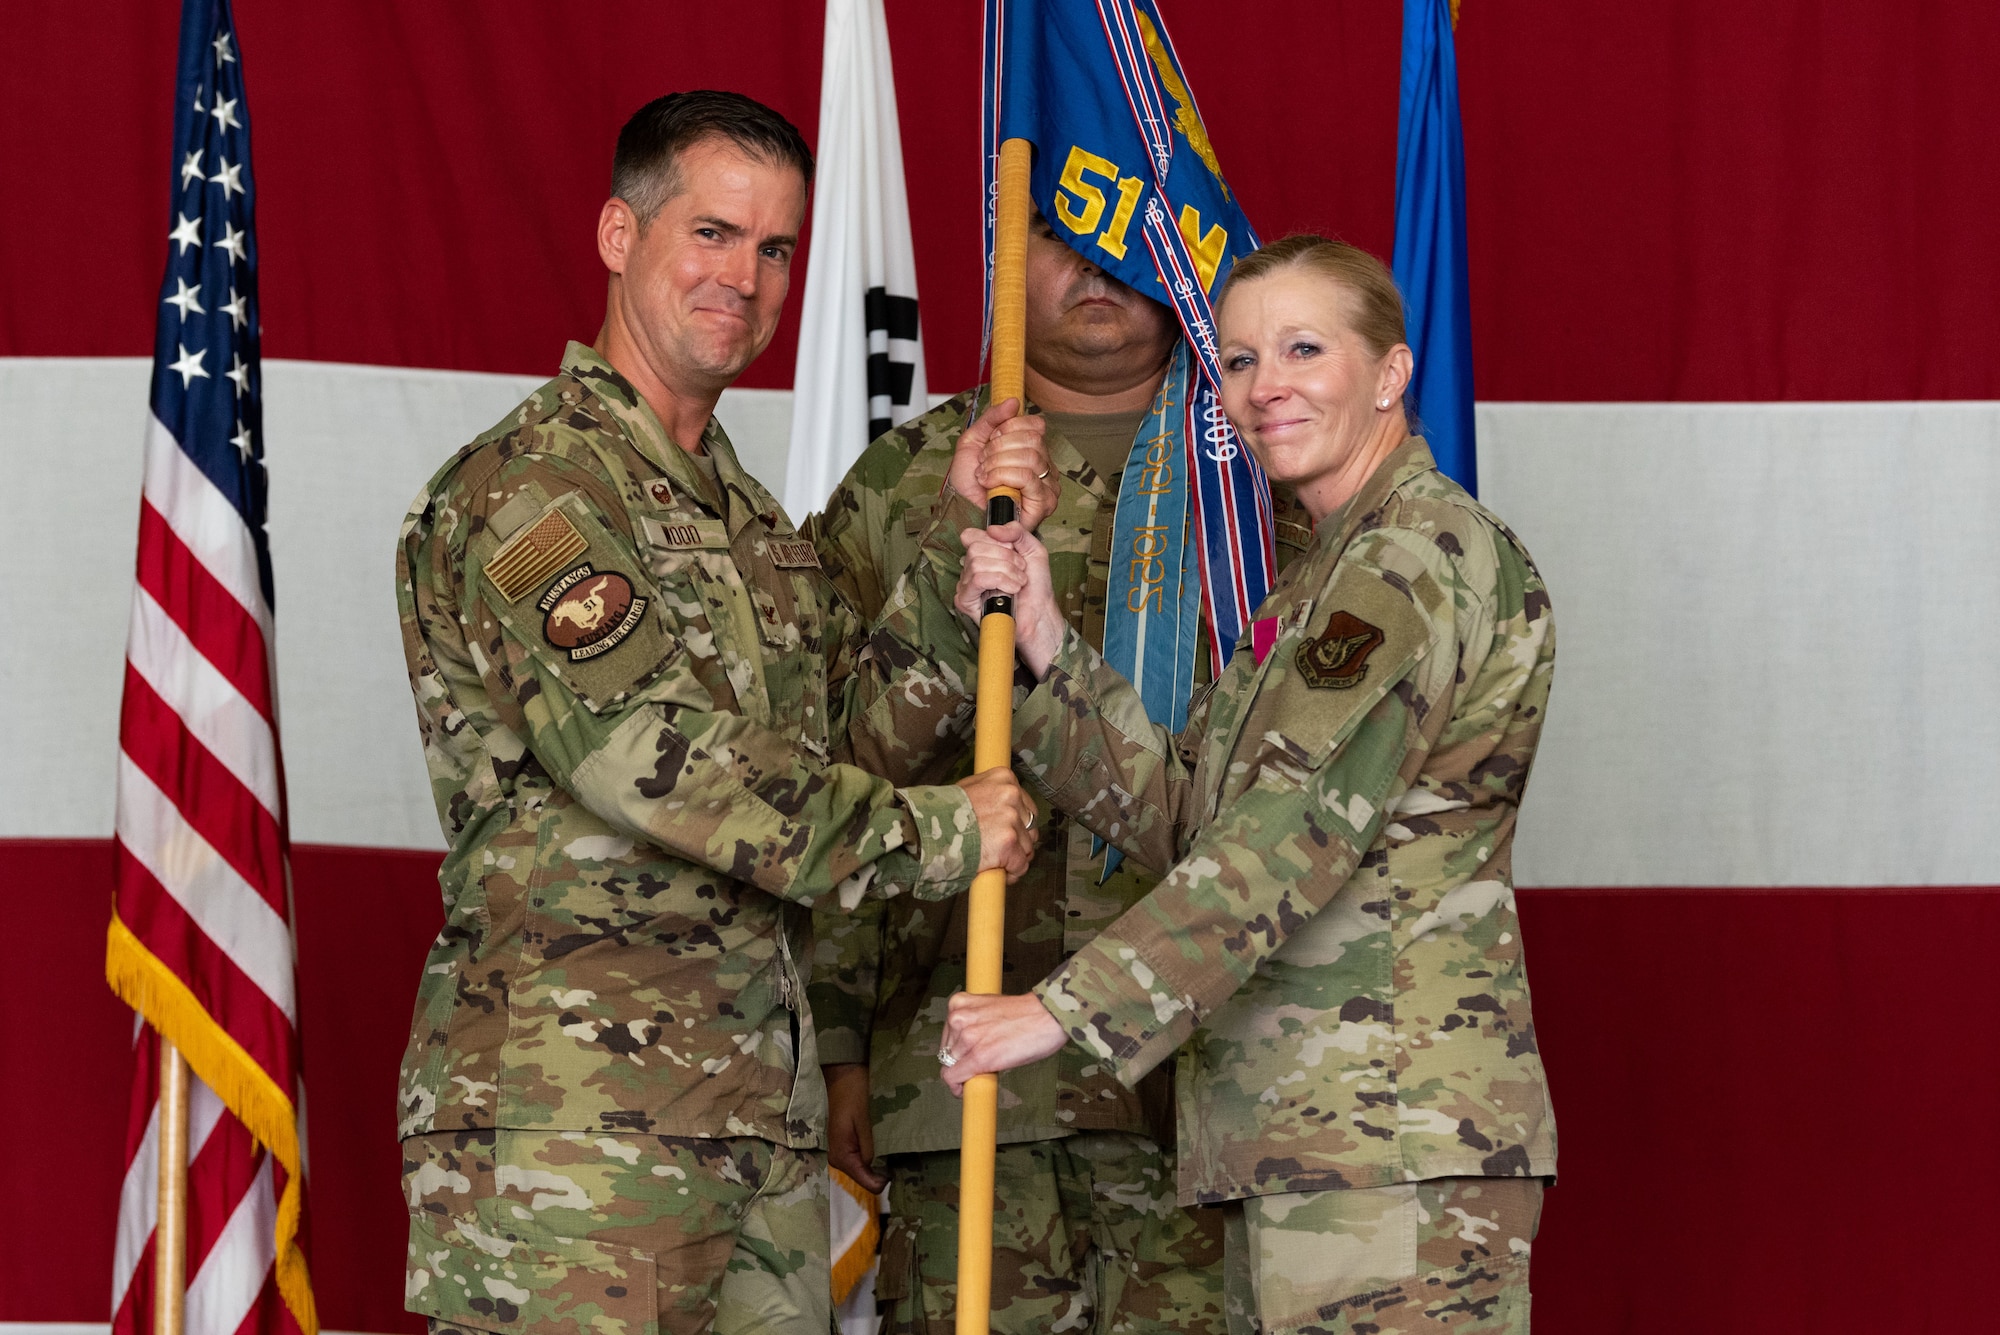 Col. Joshua Wood, 51st Fighter Wing commander, receives the guidon from Col. Jonelle Eychner, 51st Mission Support Group outgoing commander, during the 51st MSG change of command ceremony at Osan Air Base, Republic of Korea, July 13, 2022.